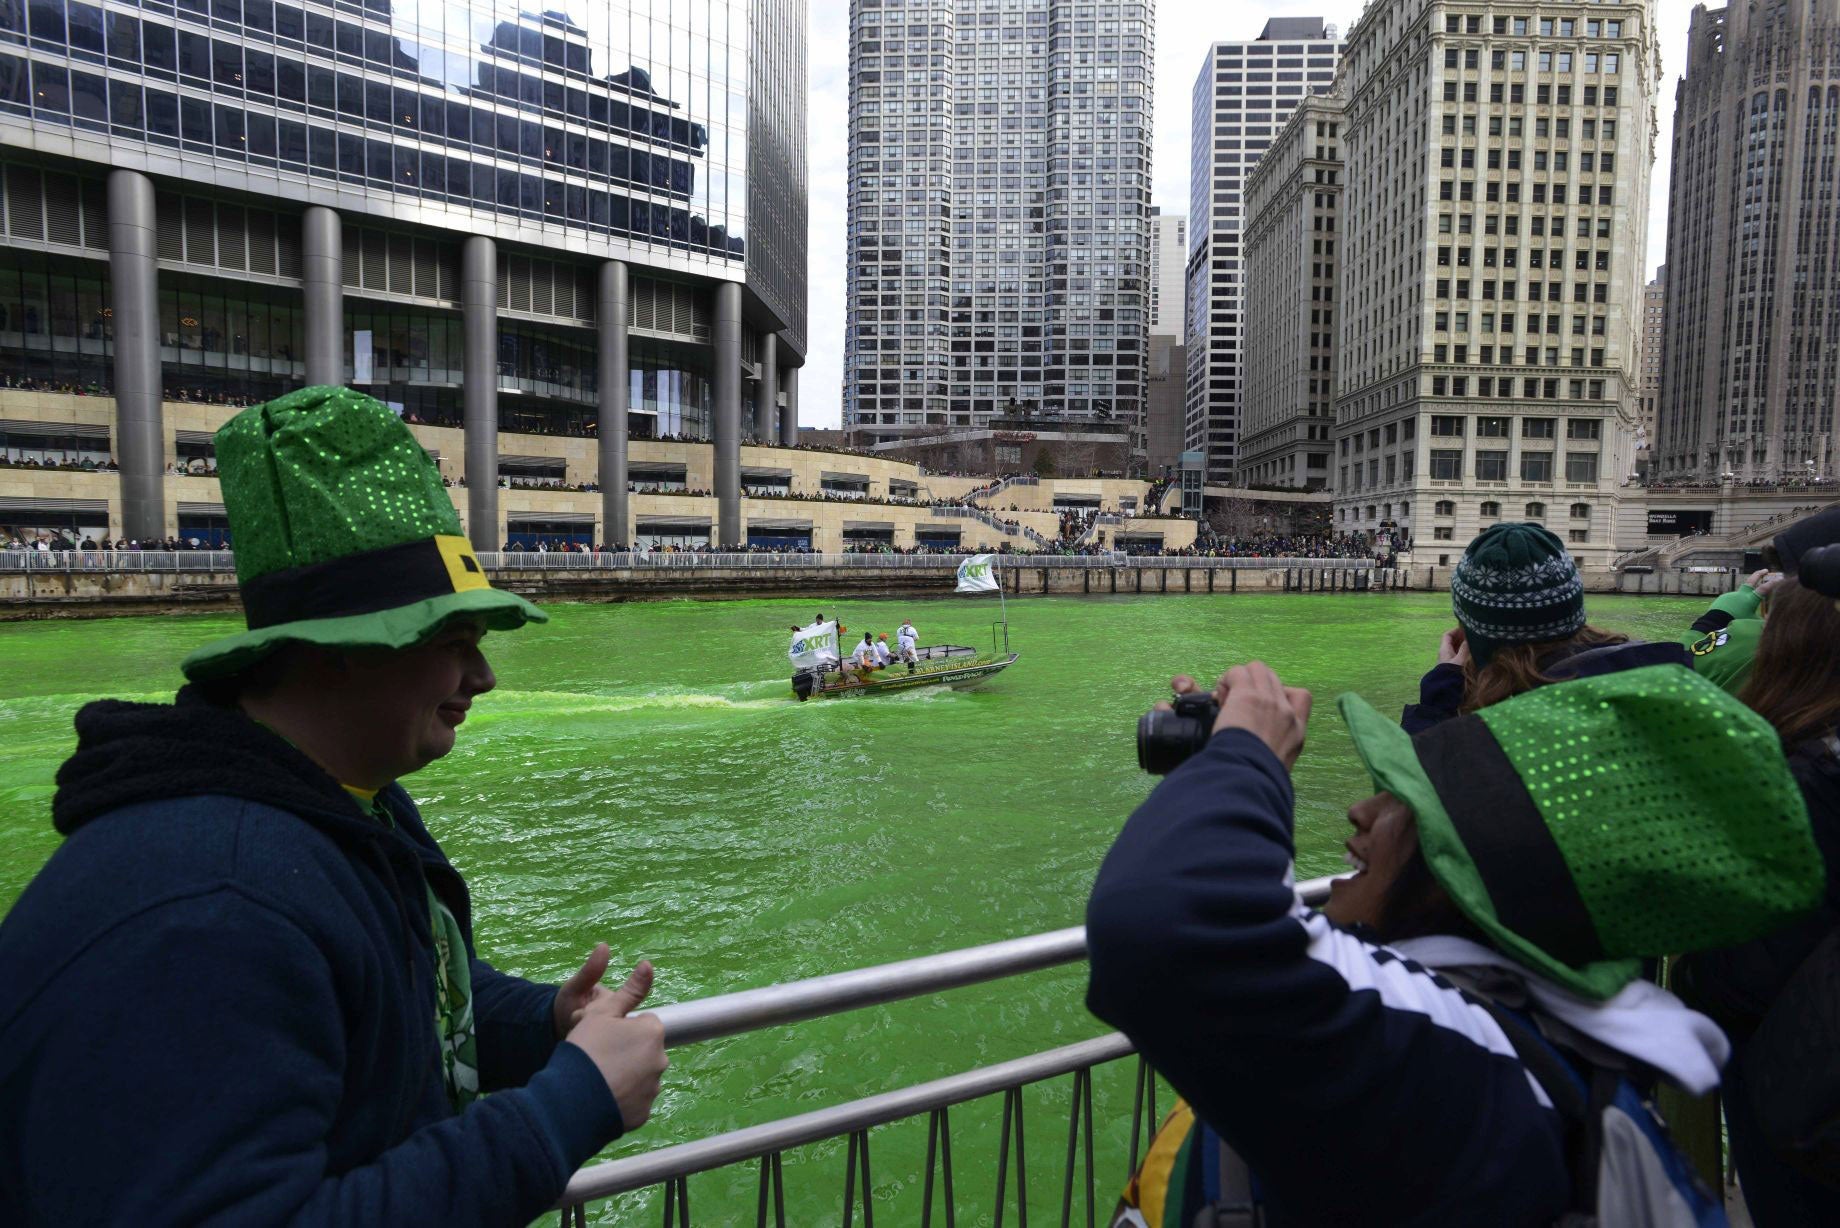 The Chicago River being dyed green ahead of the St. Patrick's Day parade